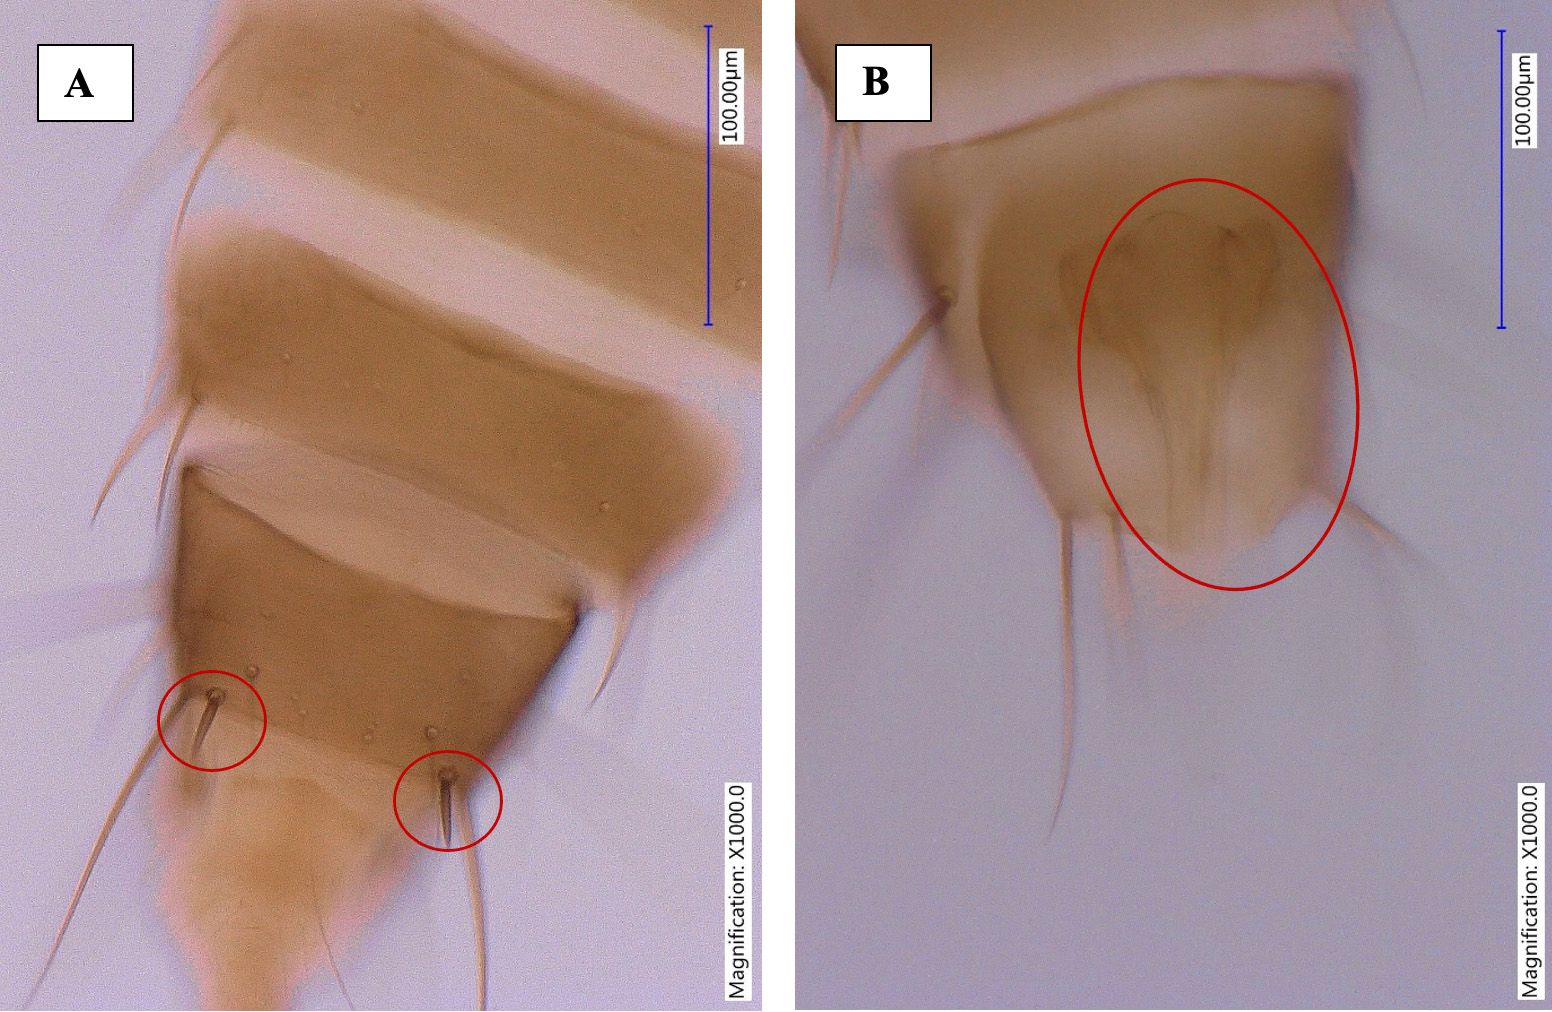 Abdominal tergites of male adult bean flower thrips, Megalurothrips usitatus Bagnall, showing abdominal tergite IX with pair of short and very stout setae (A) and copulatory organ (B).